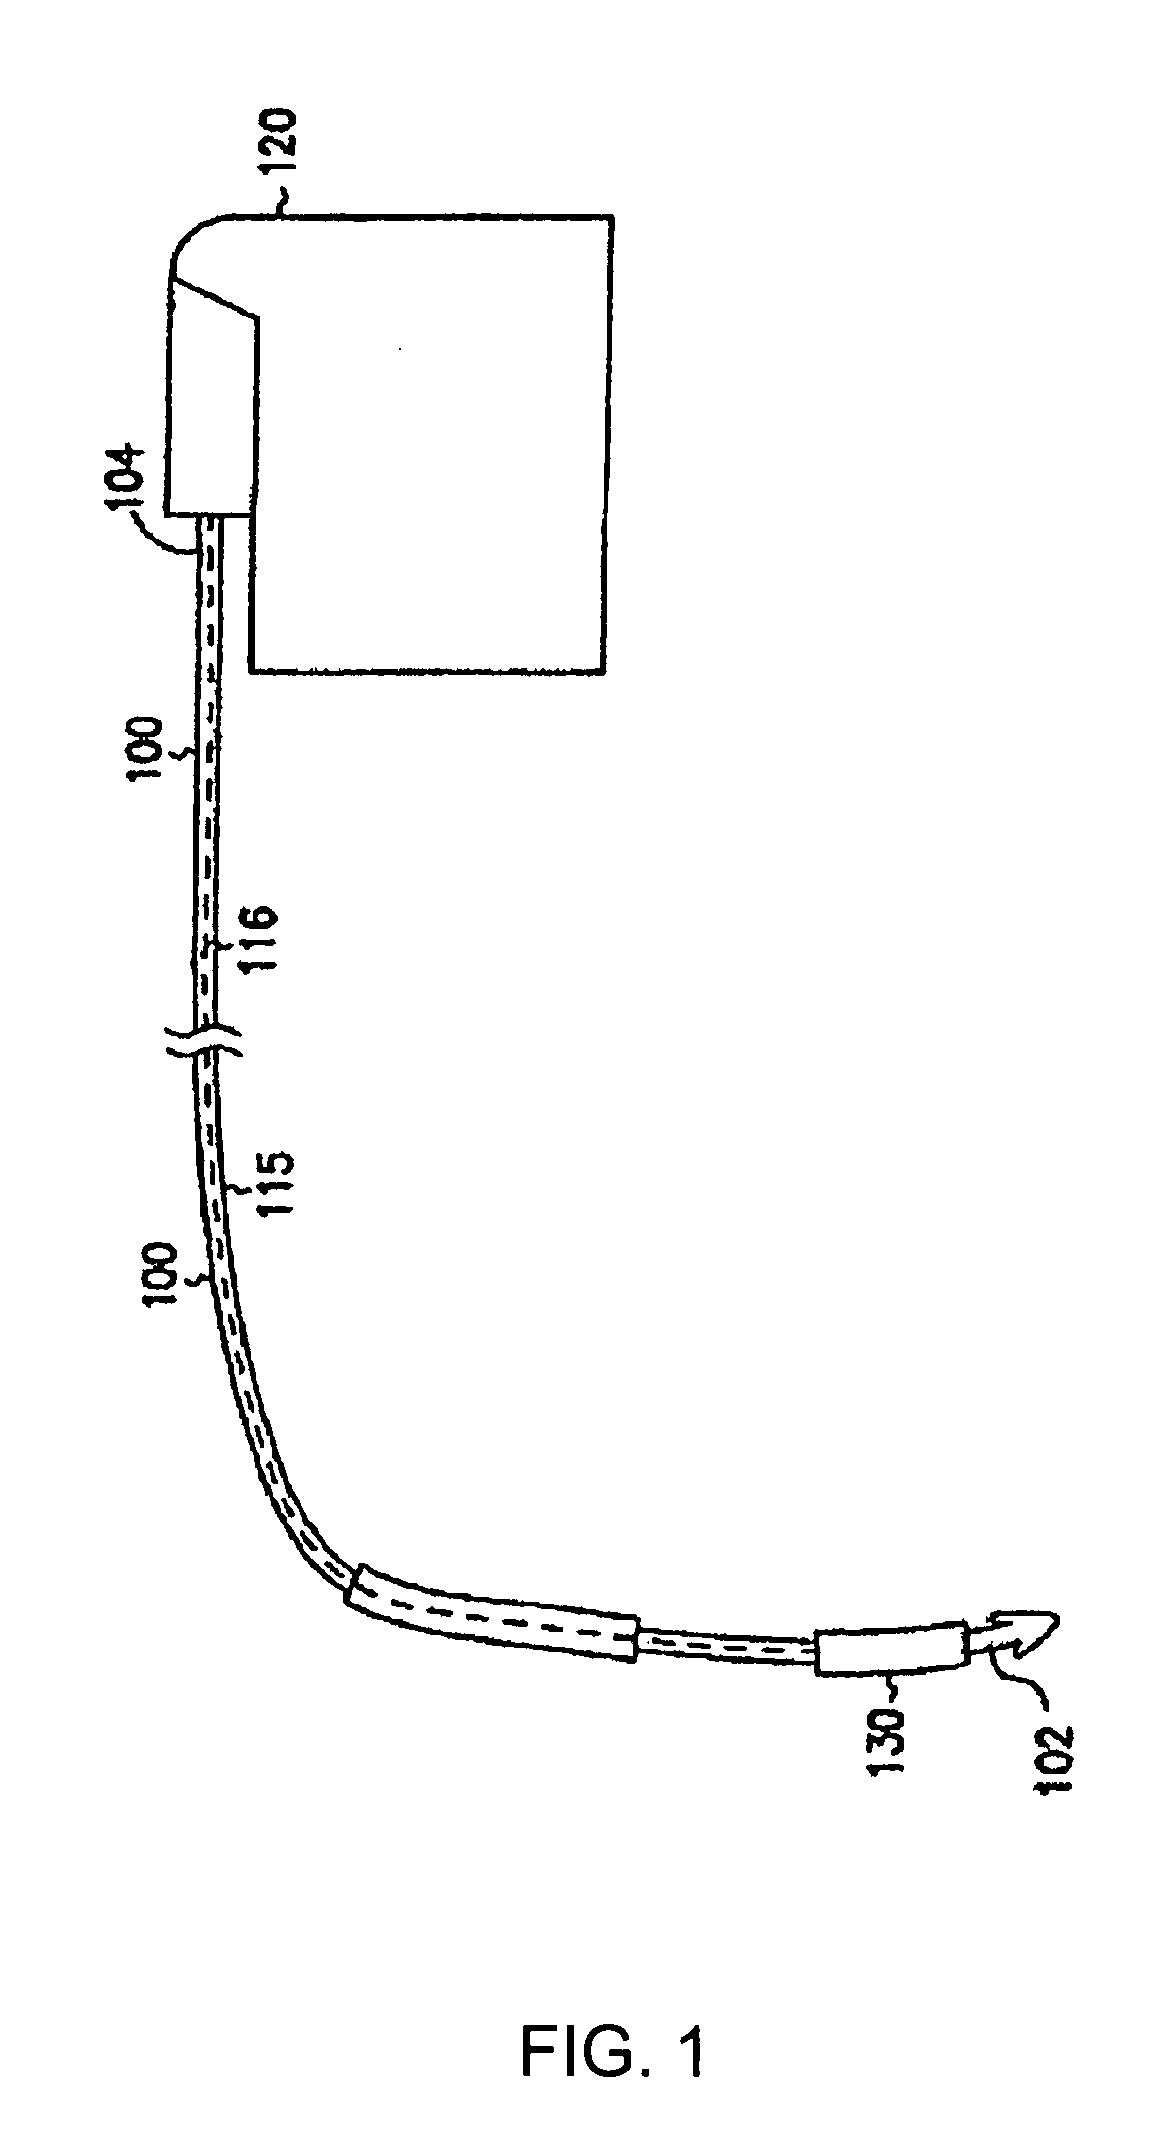 Conductive polymer patterned electrode for pacing